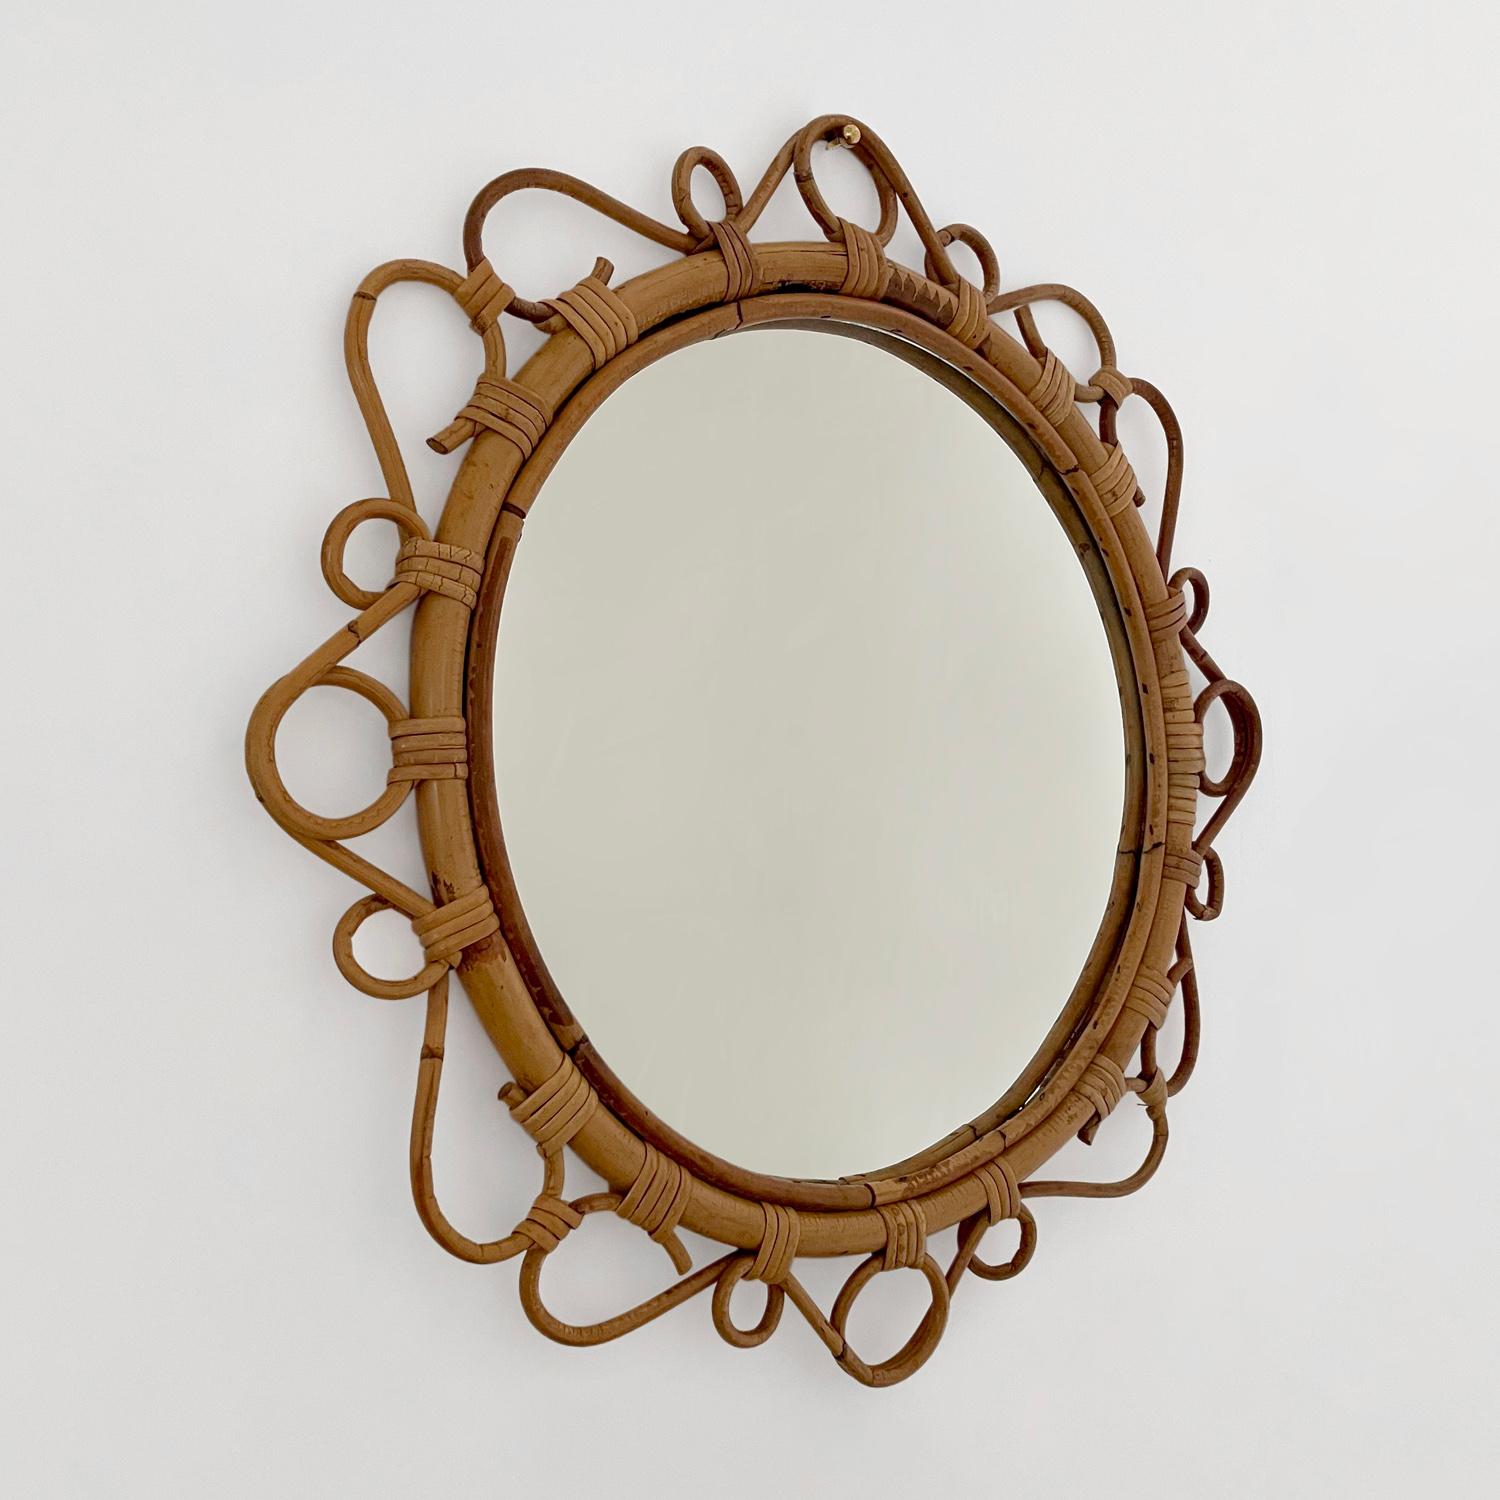 French rattan circular wall mirror
France, circa 1950’s
Circular mirror frame is comprised of intricately coiled rattan
Whimsical statement piece
Natural color variations
Original mirror may have light surface markings
Patina from age and use